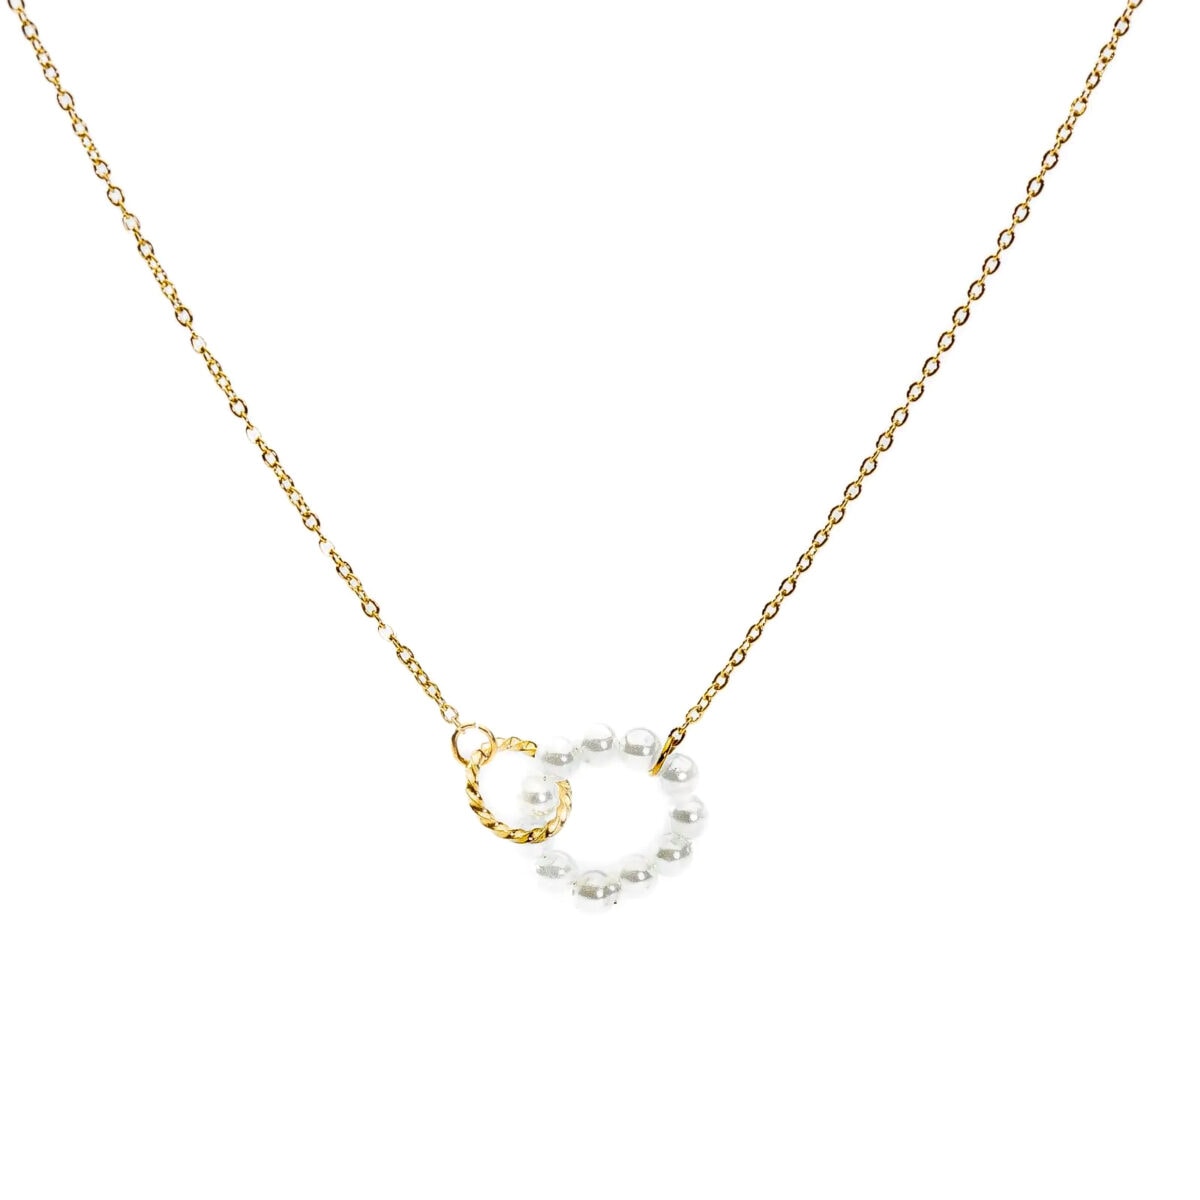 https://m.clubbella.co/product/pearl-link-gold-necklace/ Pearl Link Gold Necklace (1)